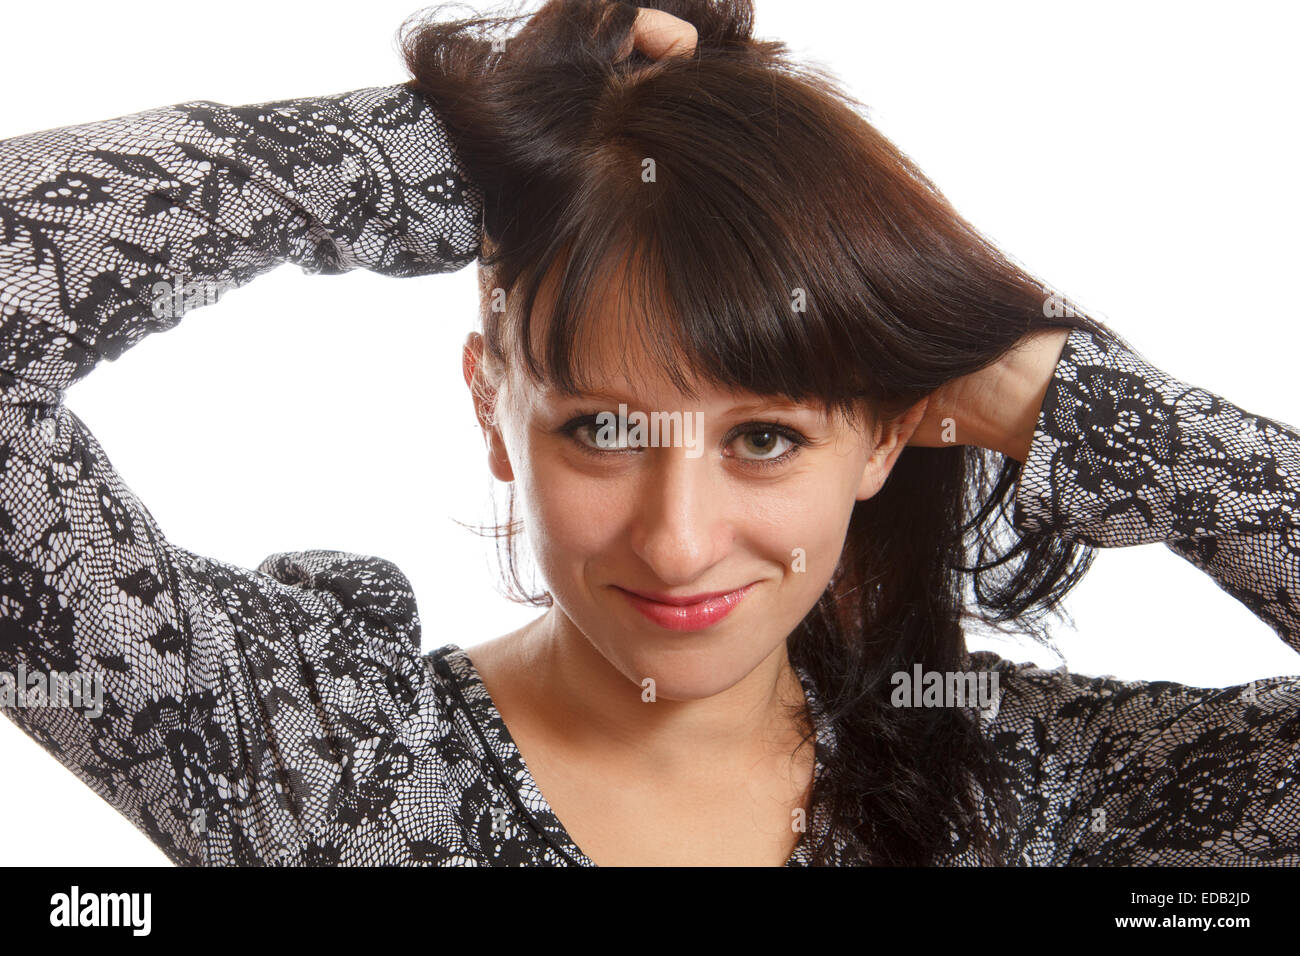 Woman and her hair Stock Photo